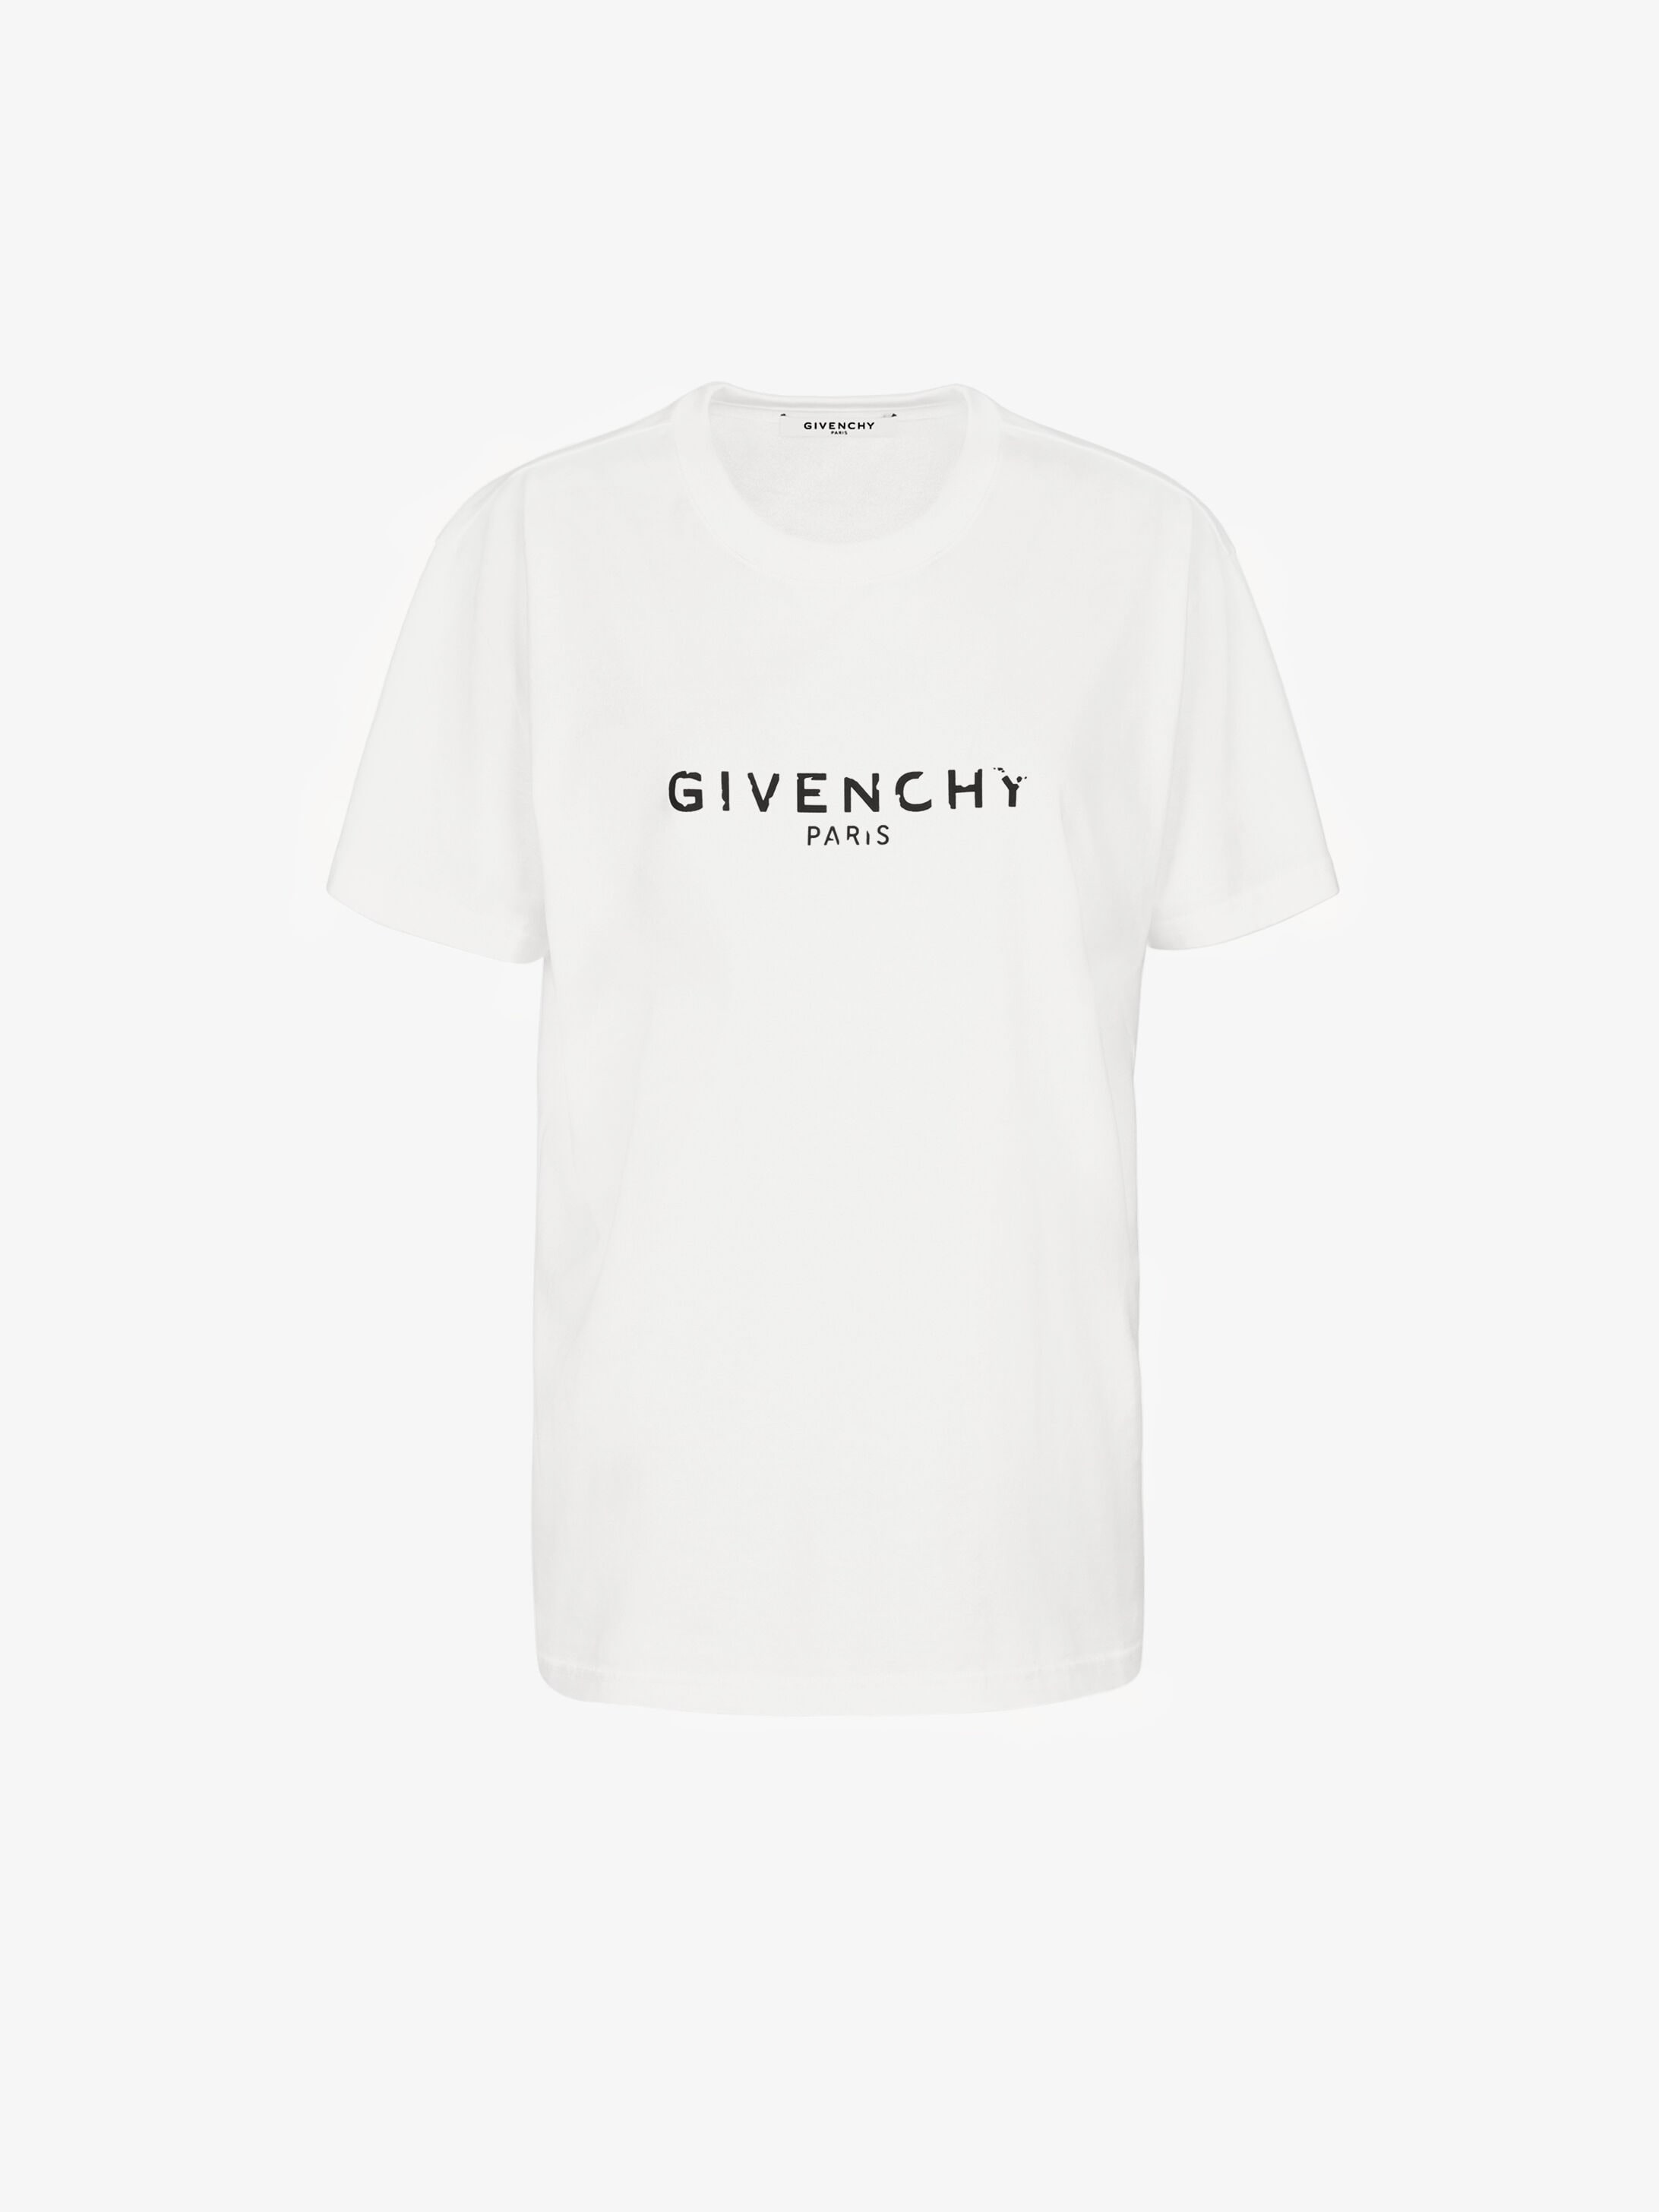 givenchy ripped t shirt